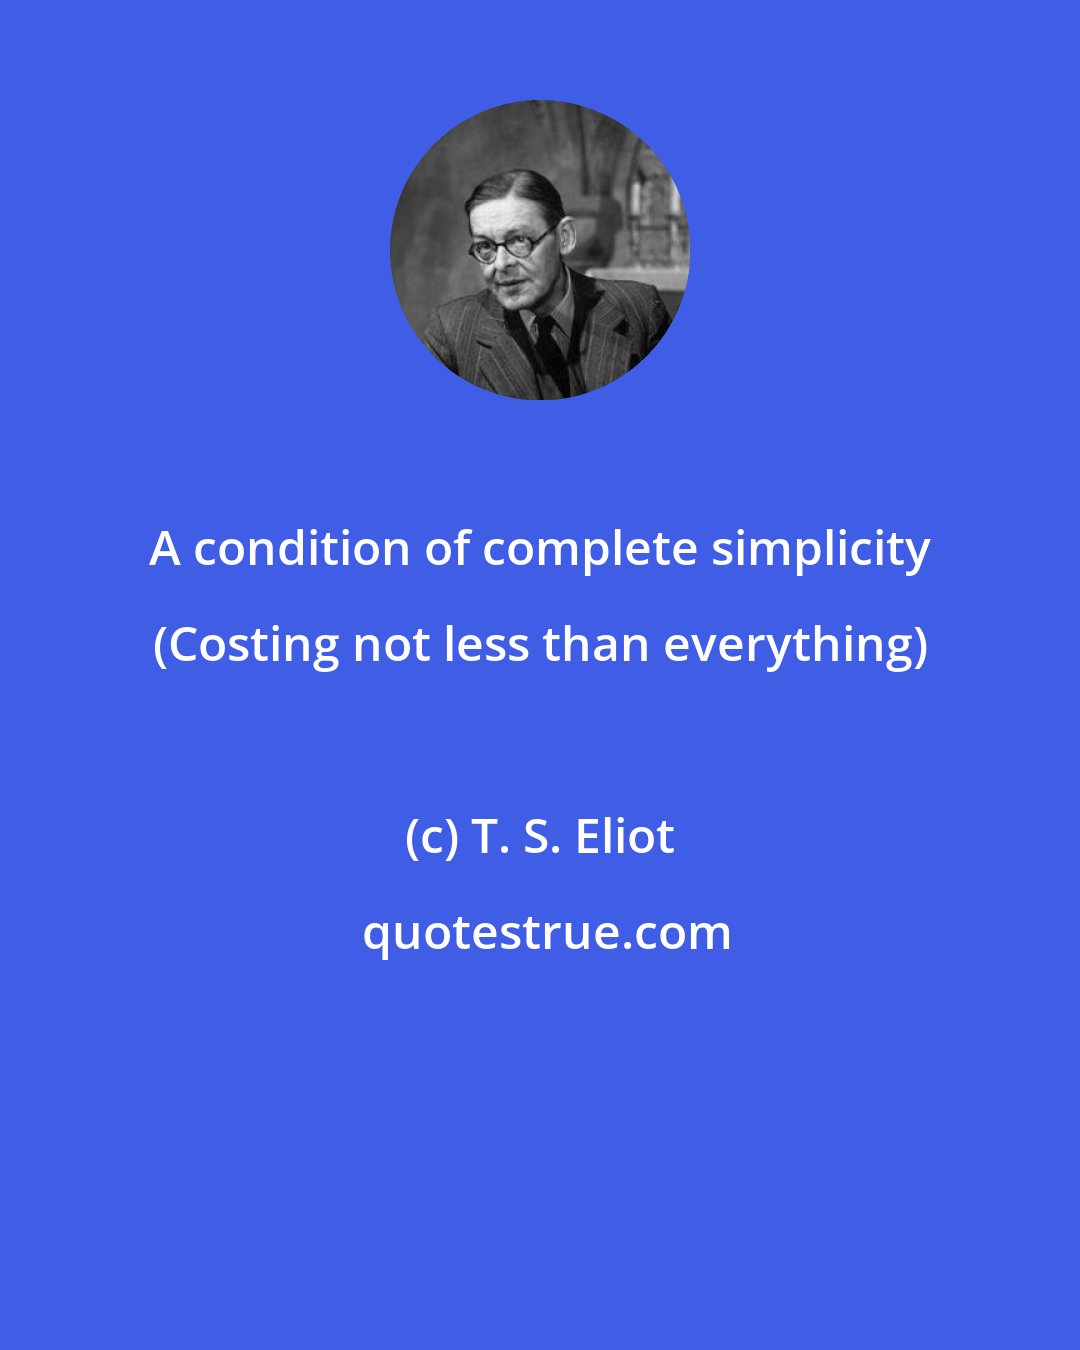 T. S. Eliot: A condition of complete simplicity (Costing not less than everything)